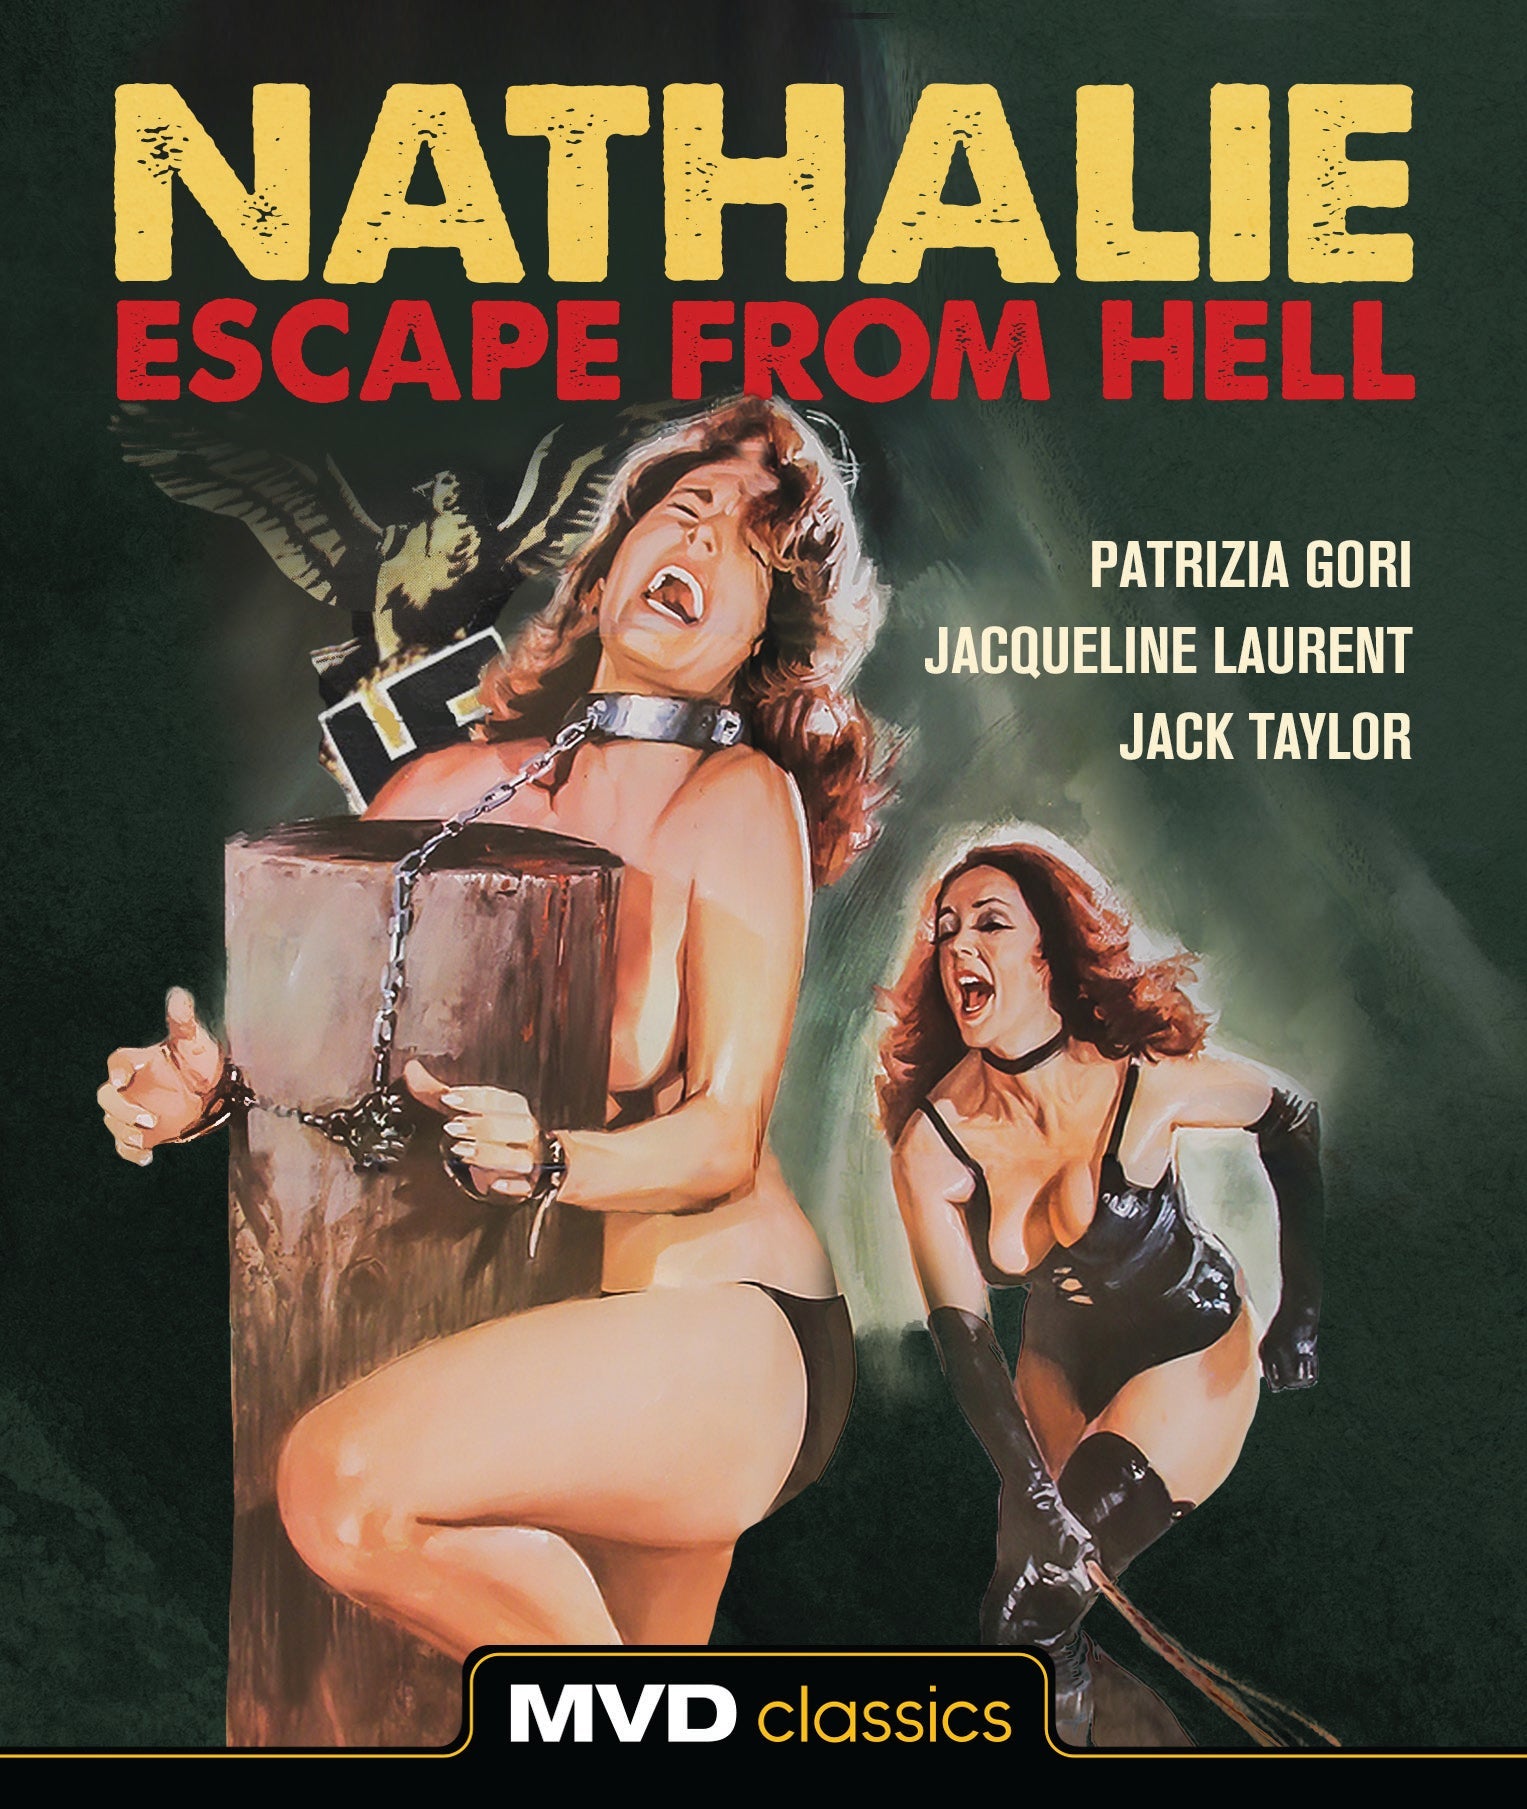 Nathalie: Escape From Hell Blu-Ray Blu-Ray